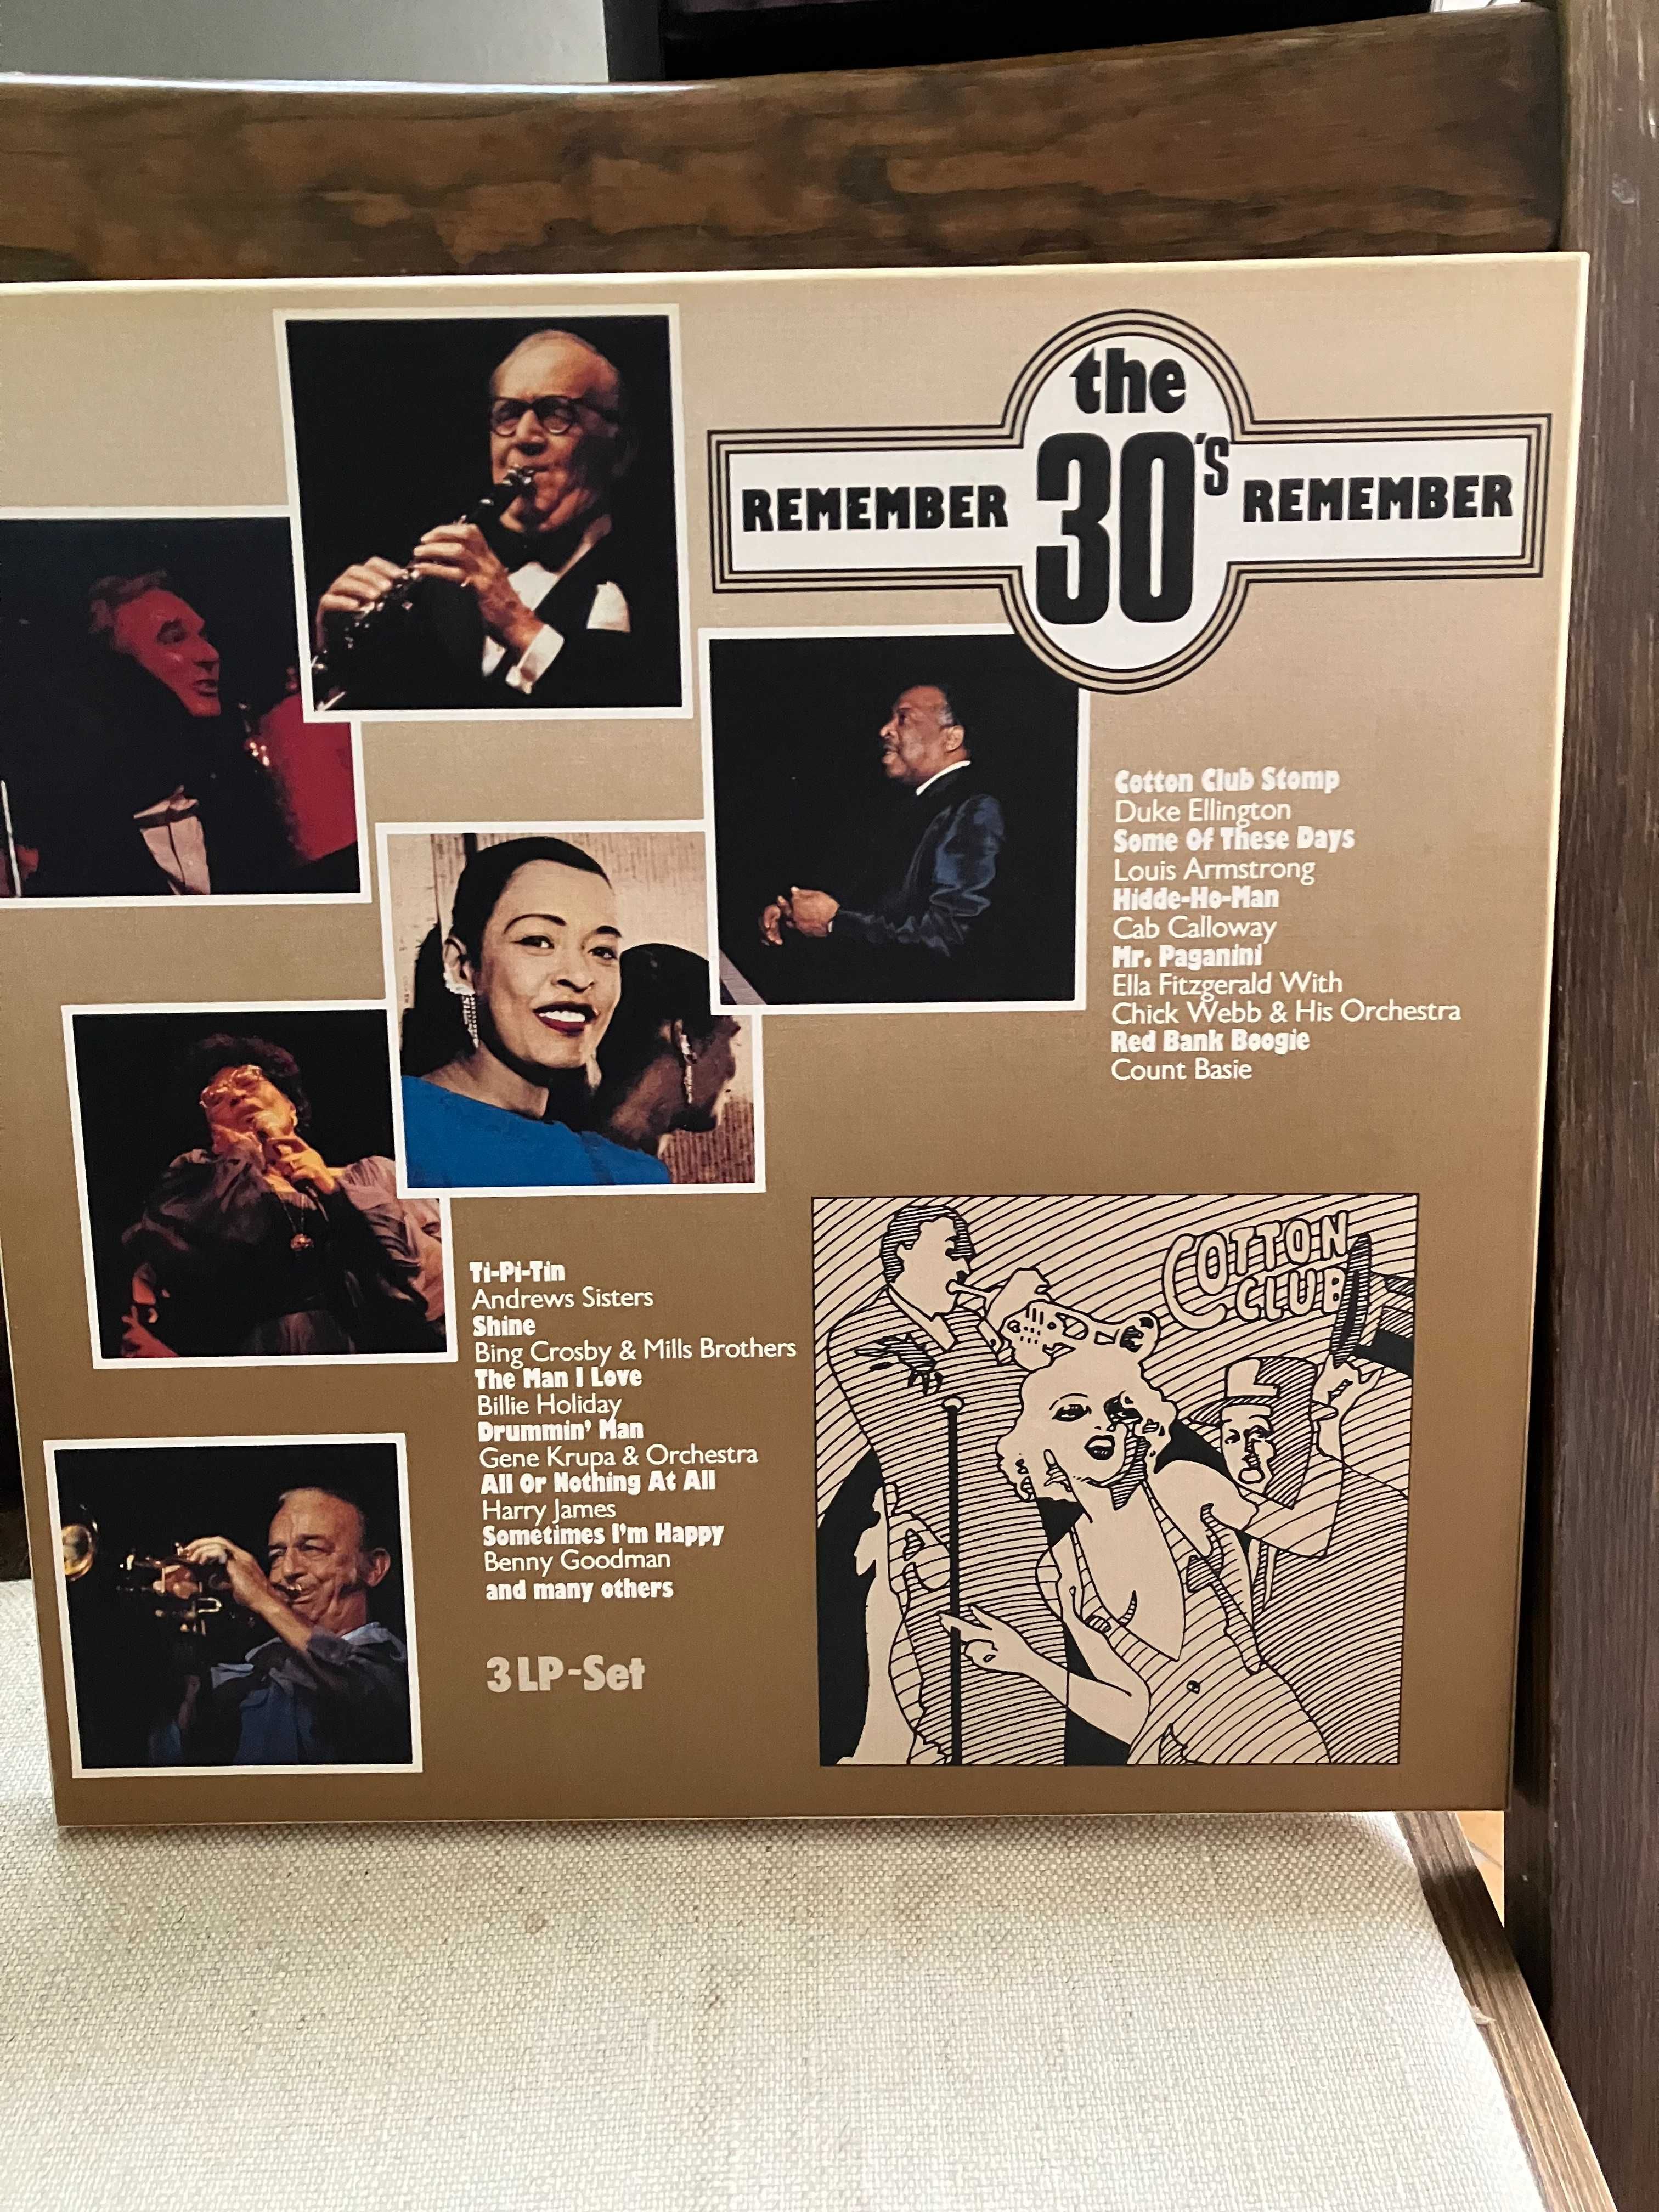 Winyl  " The 30 's  Remember " 3 lp very good